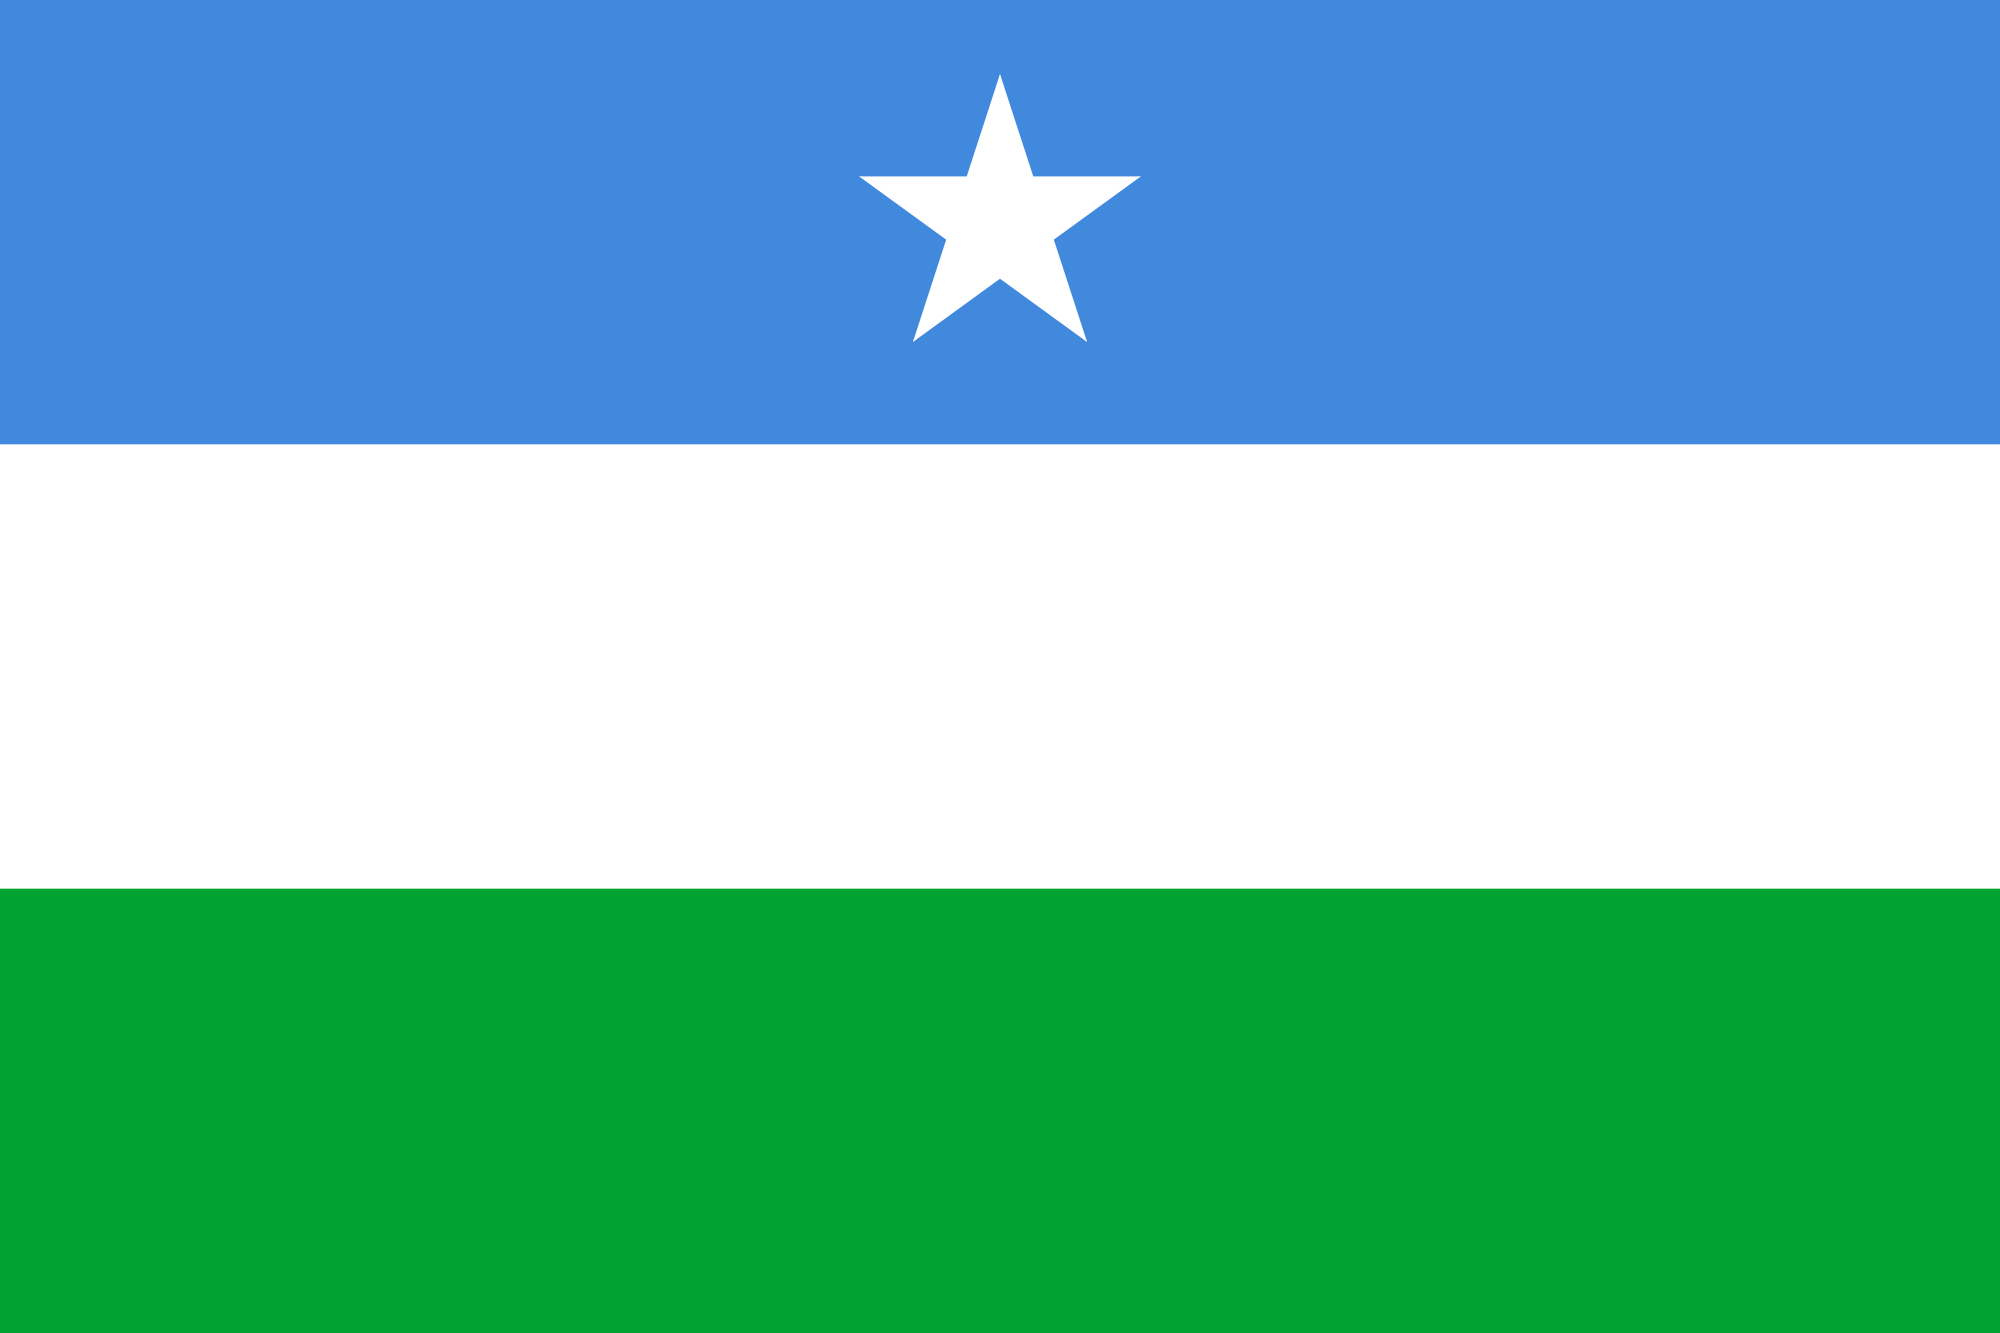 A STATE OF DROUGHT EMERGENCY DECLARED IN PUNTLAND STATE OF SOMALIA